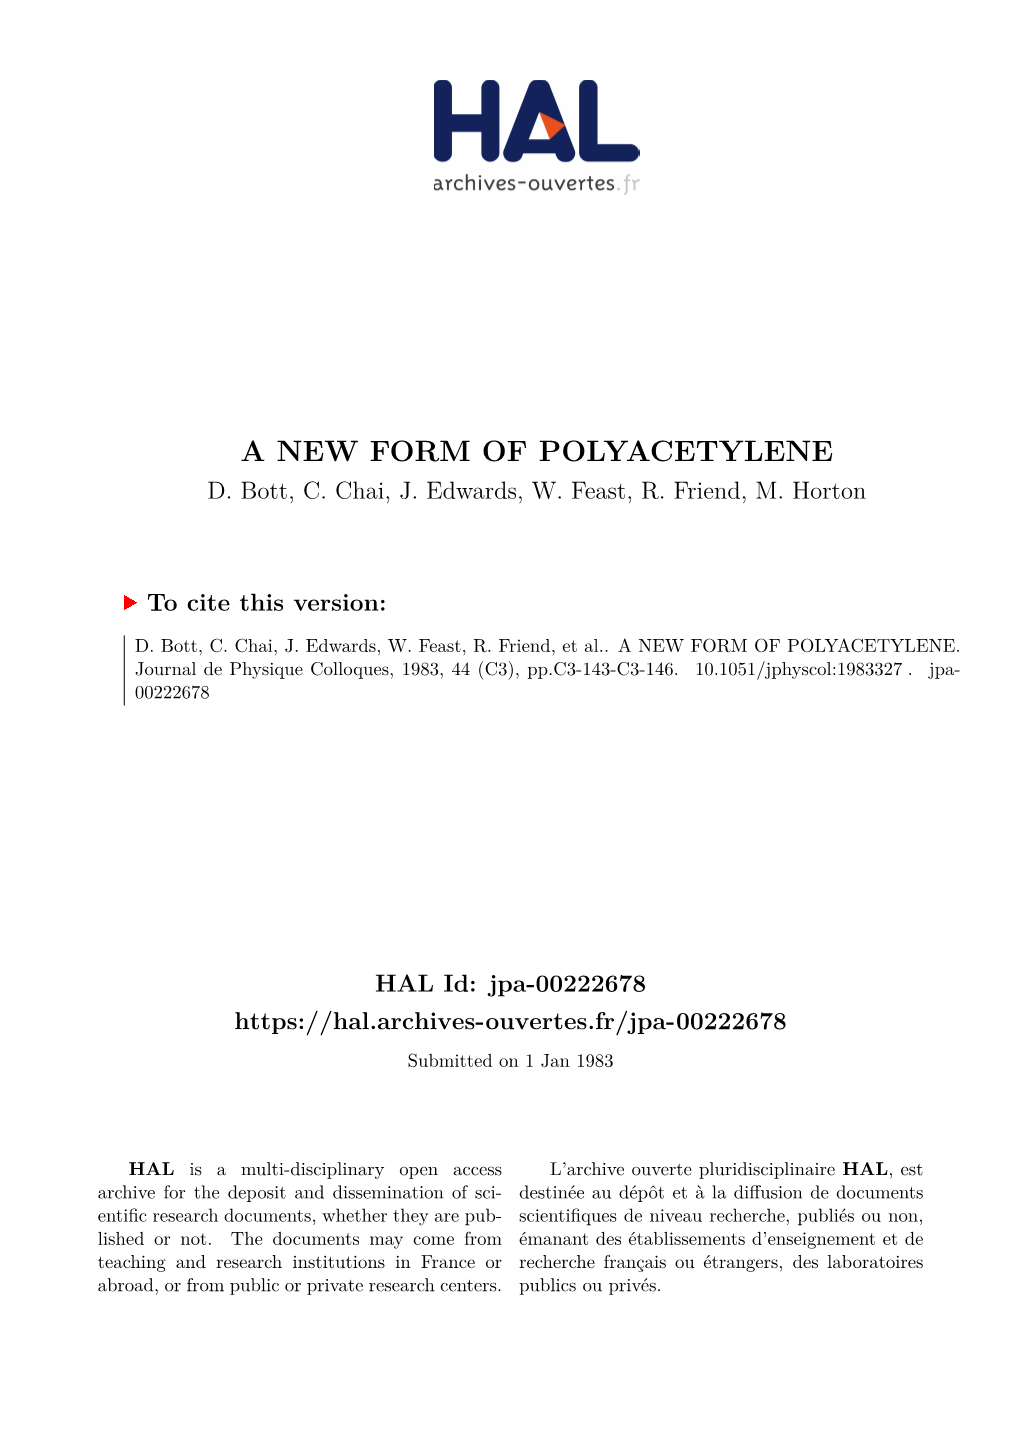 A New Form of Polyacetylene D